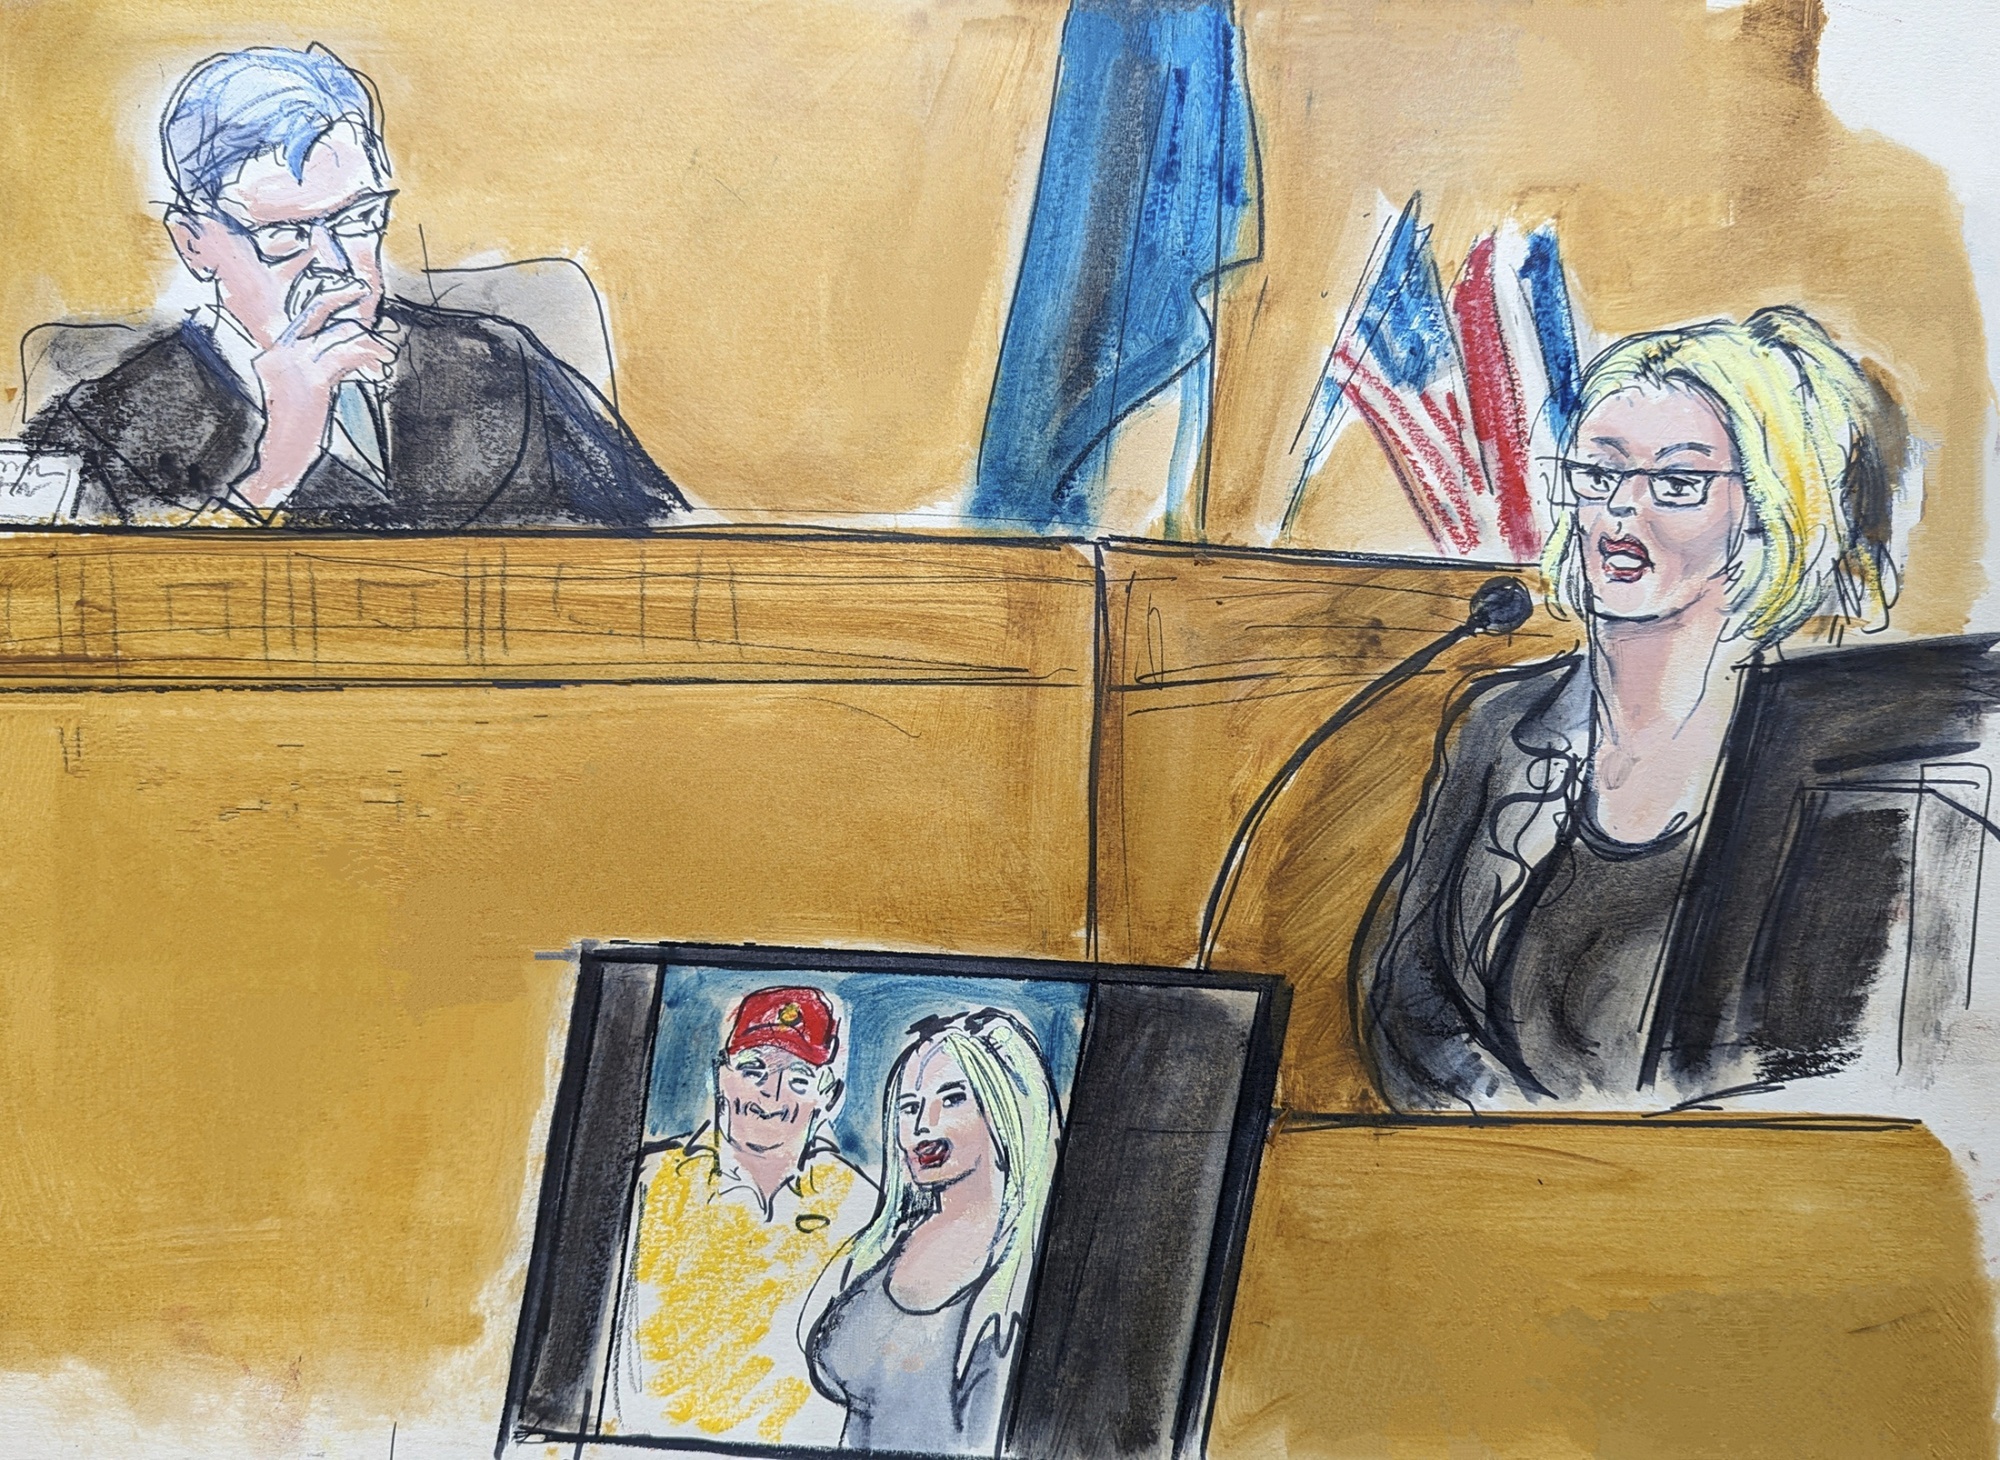 Adult film star Stormy Daniels testifies on the witness stand as Judge Juan Merchan looks on in Manhattan criminal court on May 7.